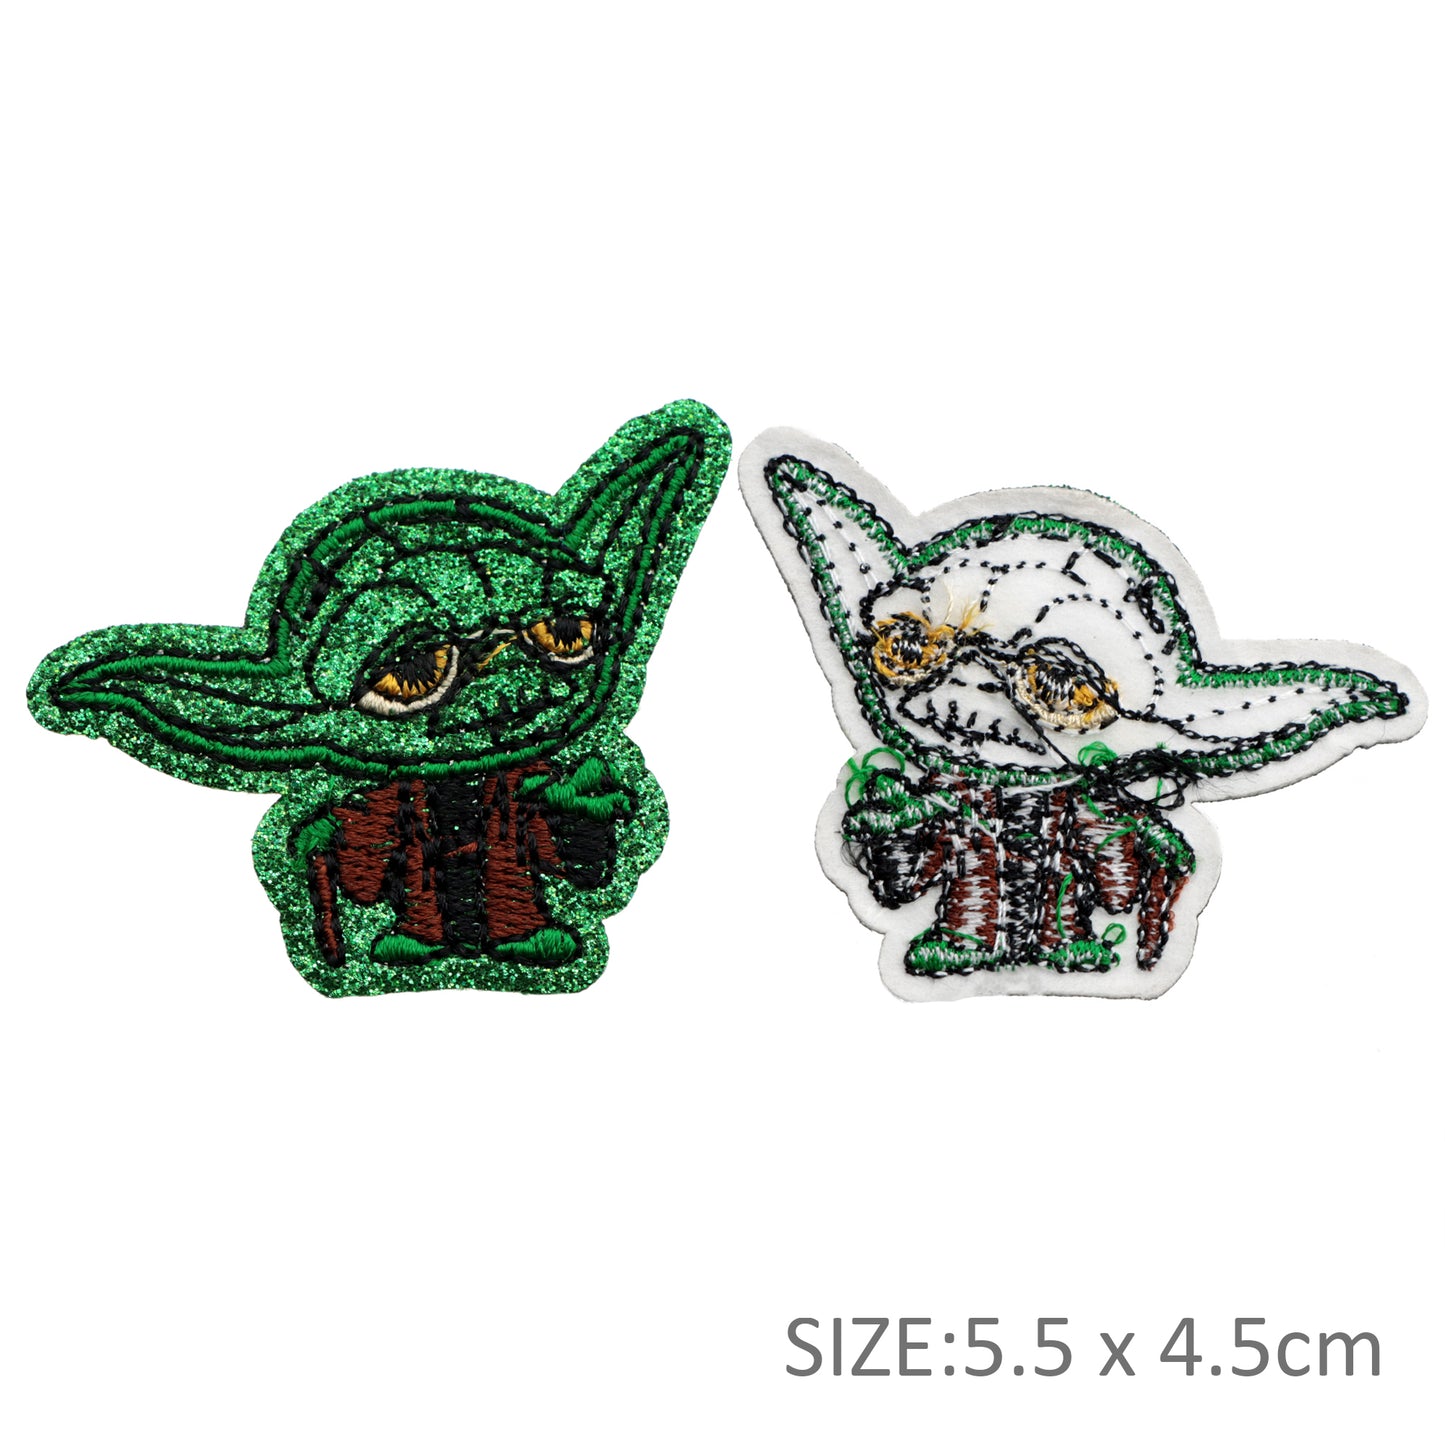 Embroidery Patches Wholesale